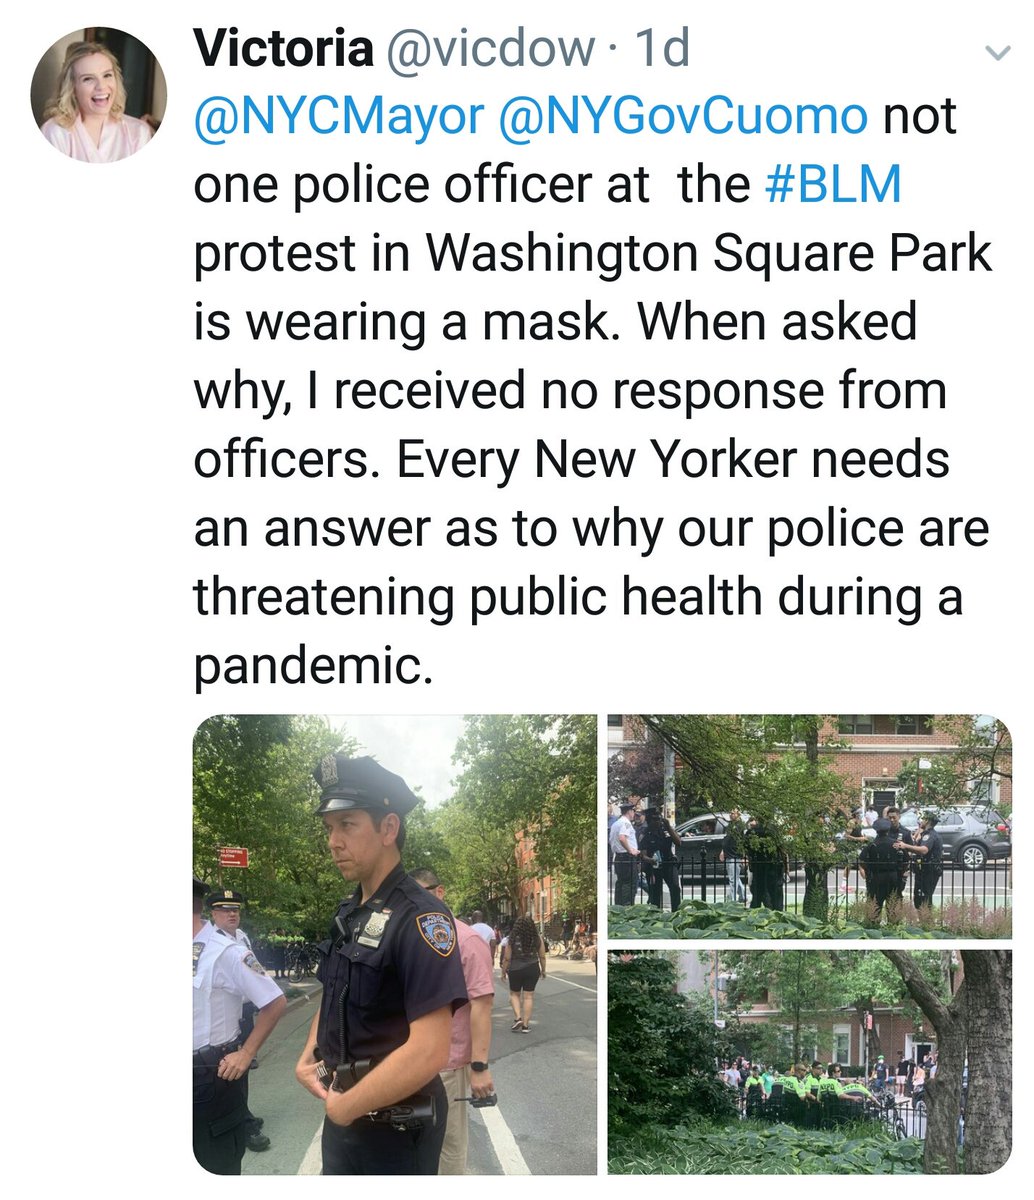 Adding to threadOf all places...you'd think the  #NYPD would be most cautious of all and be wearing  #MasksSadly...that was NOT the caseSame in  #DC with all those unknown mercenariesYounger people fair better when it comes to surviving  #COVID19 - so the cops are foolish